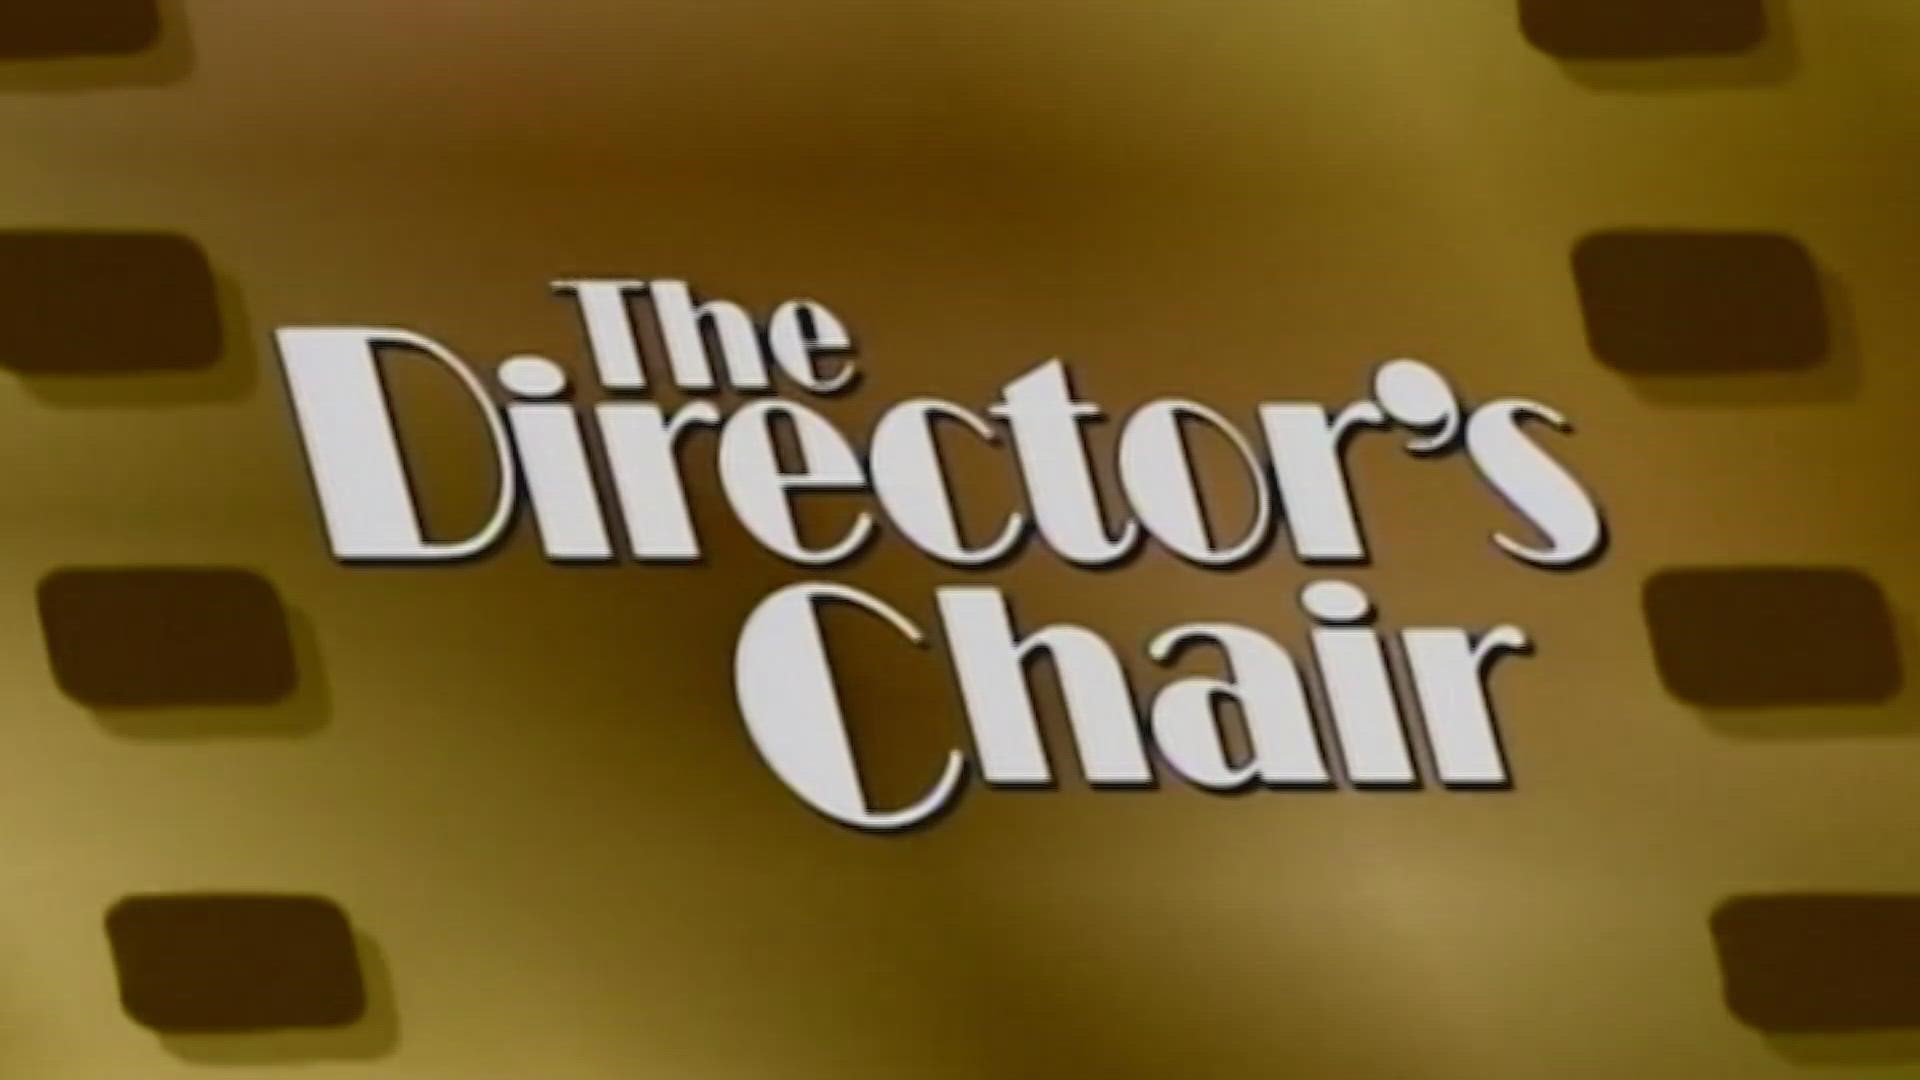 Check out the Directors Chair for new movies and shows.